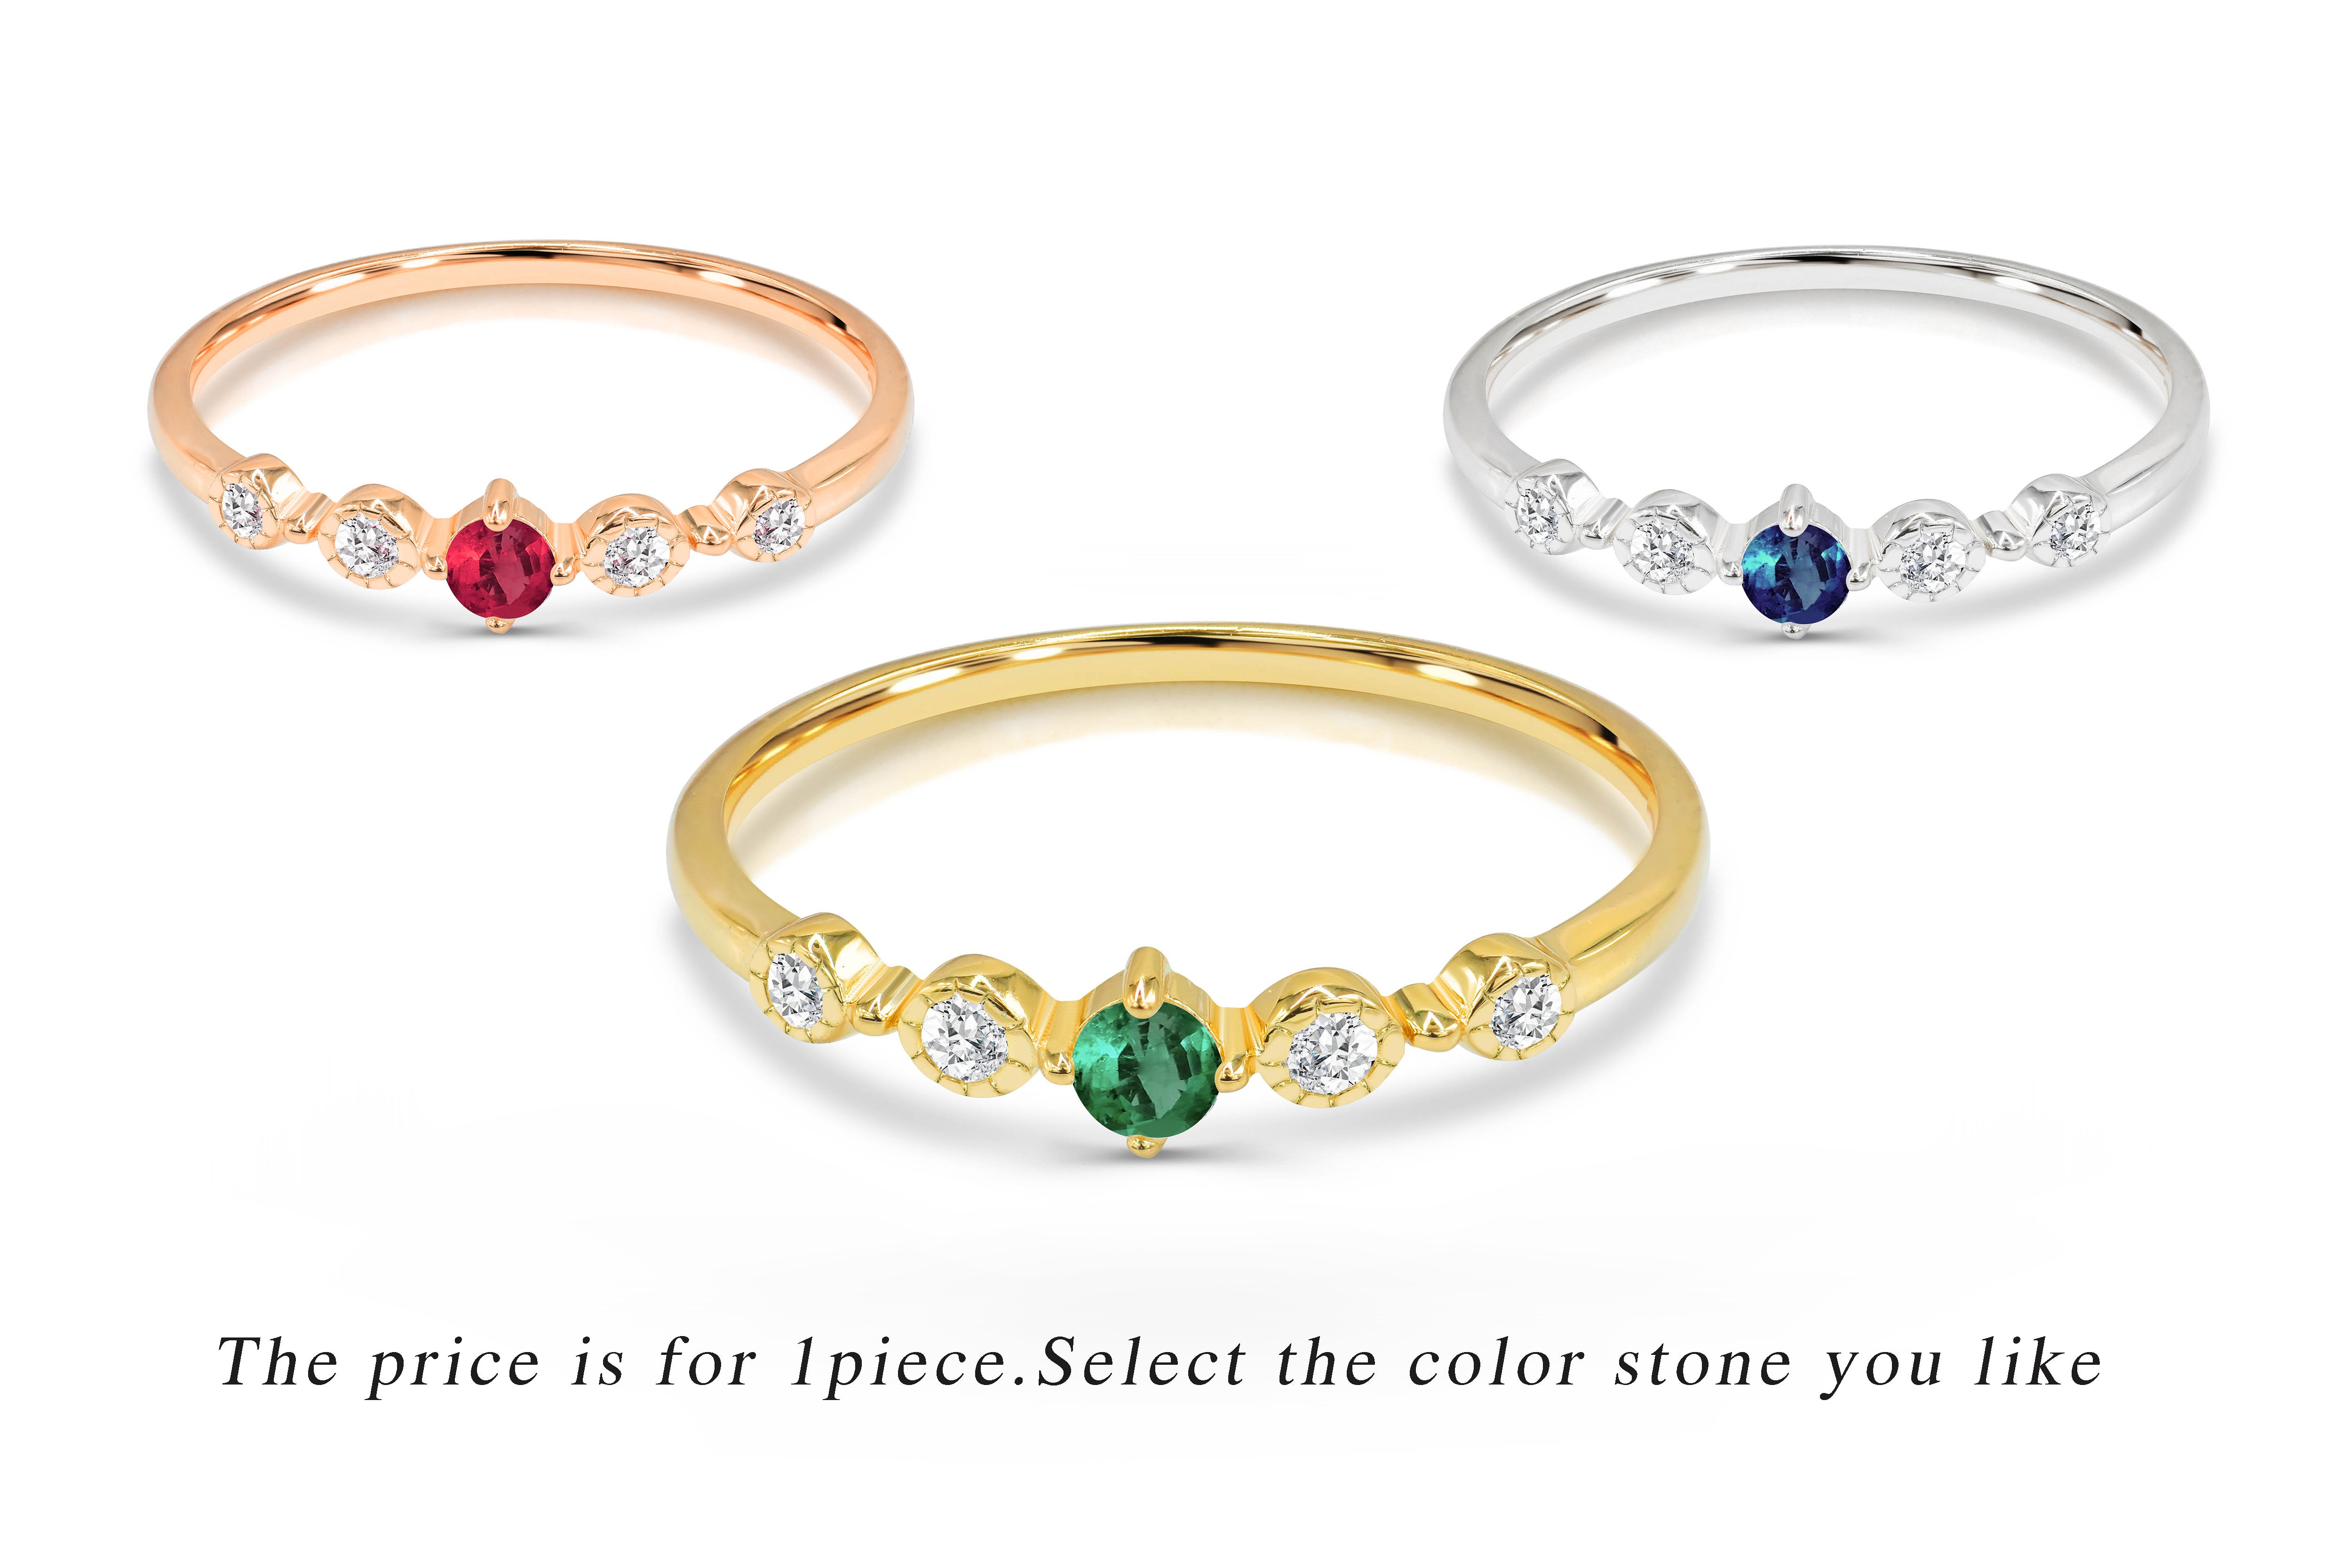 0.21 Ct Ruby, Emerald and Sapphire Promise ring in 14K Gold